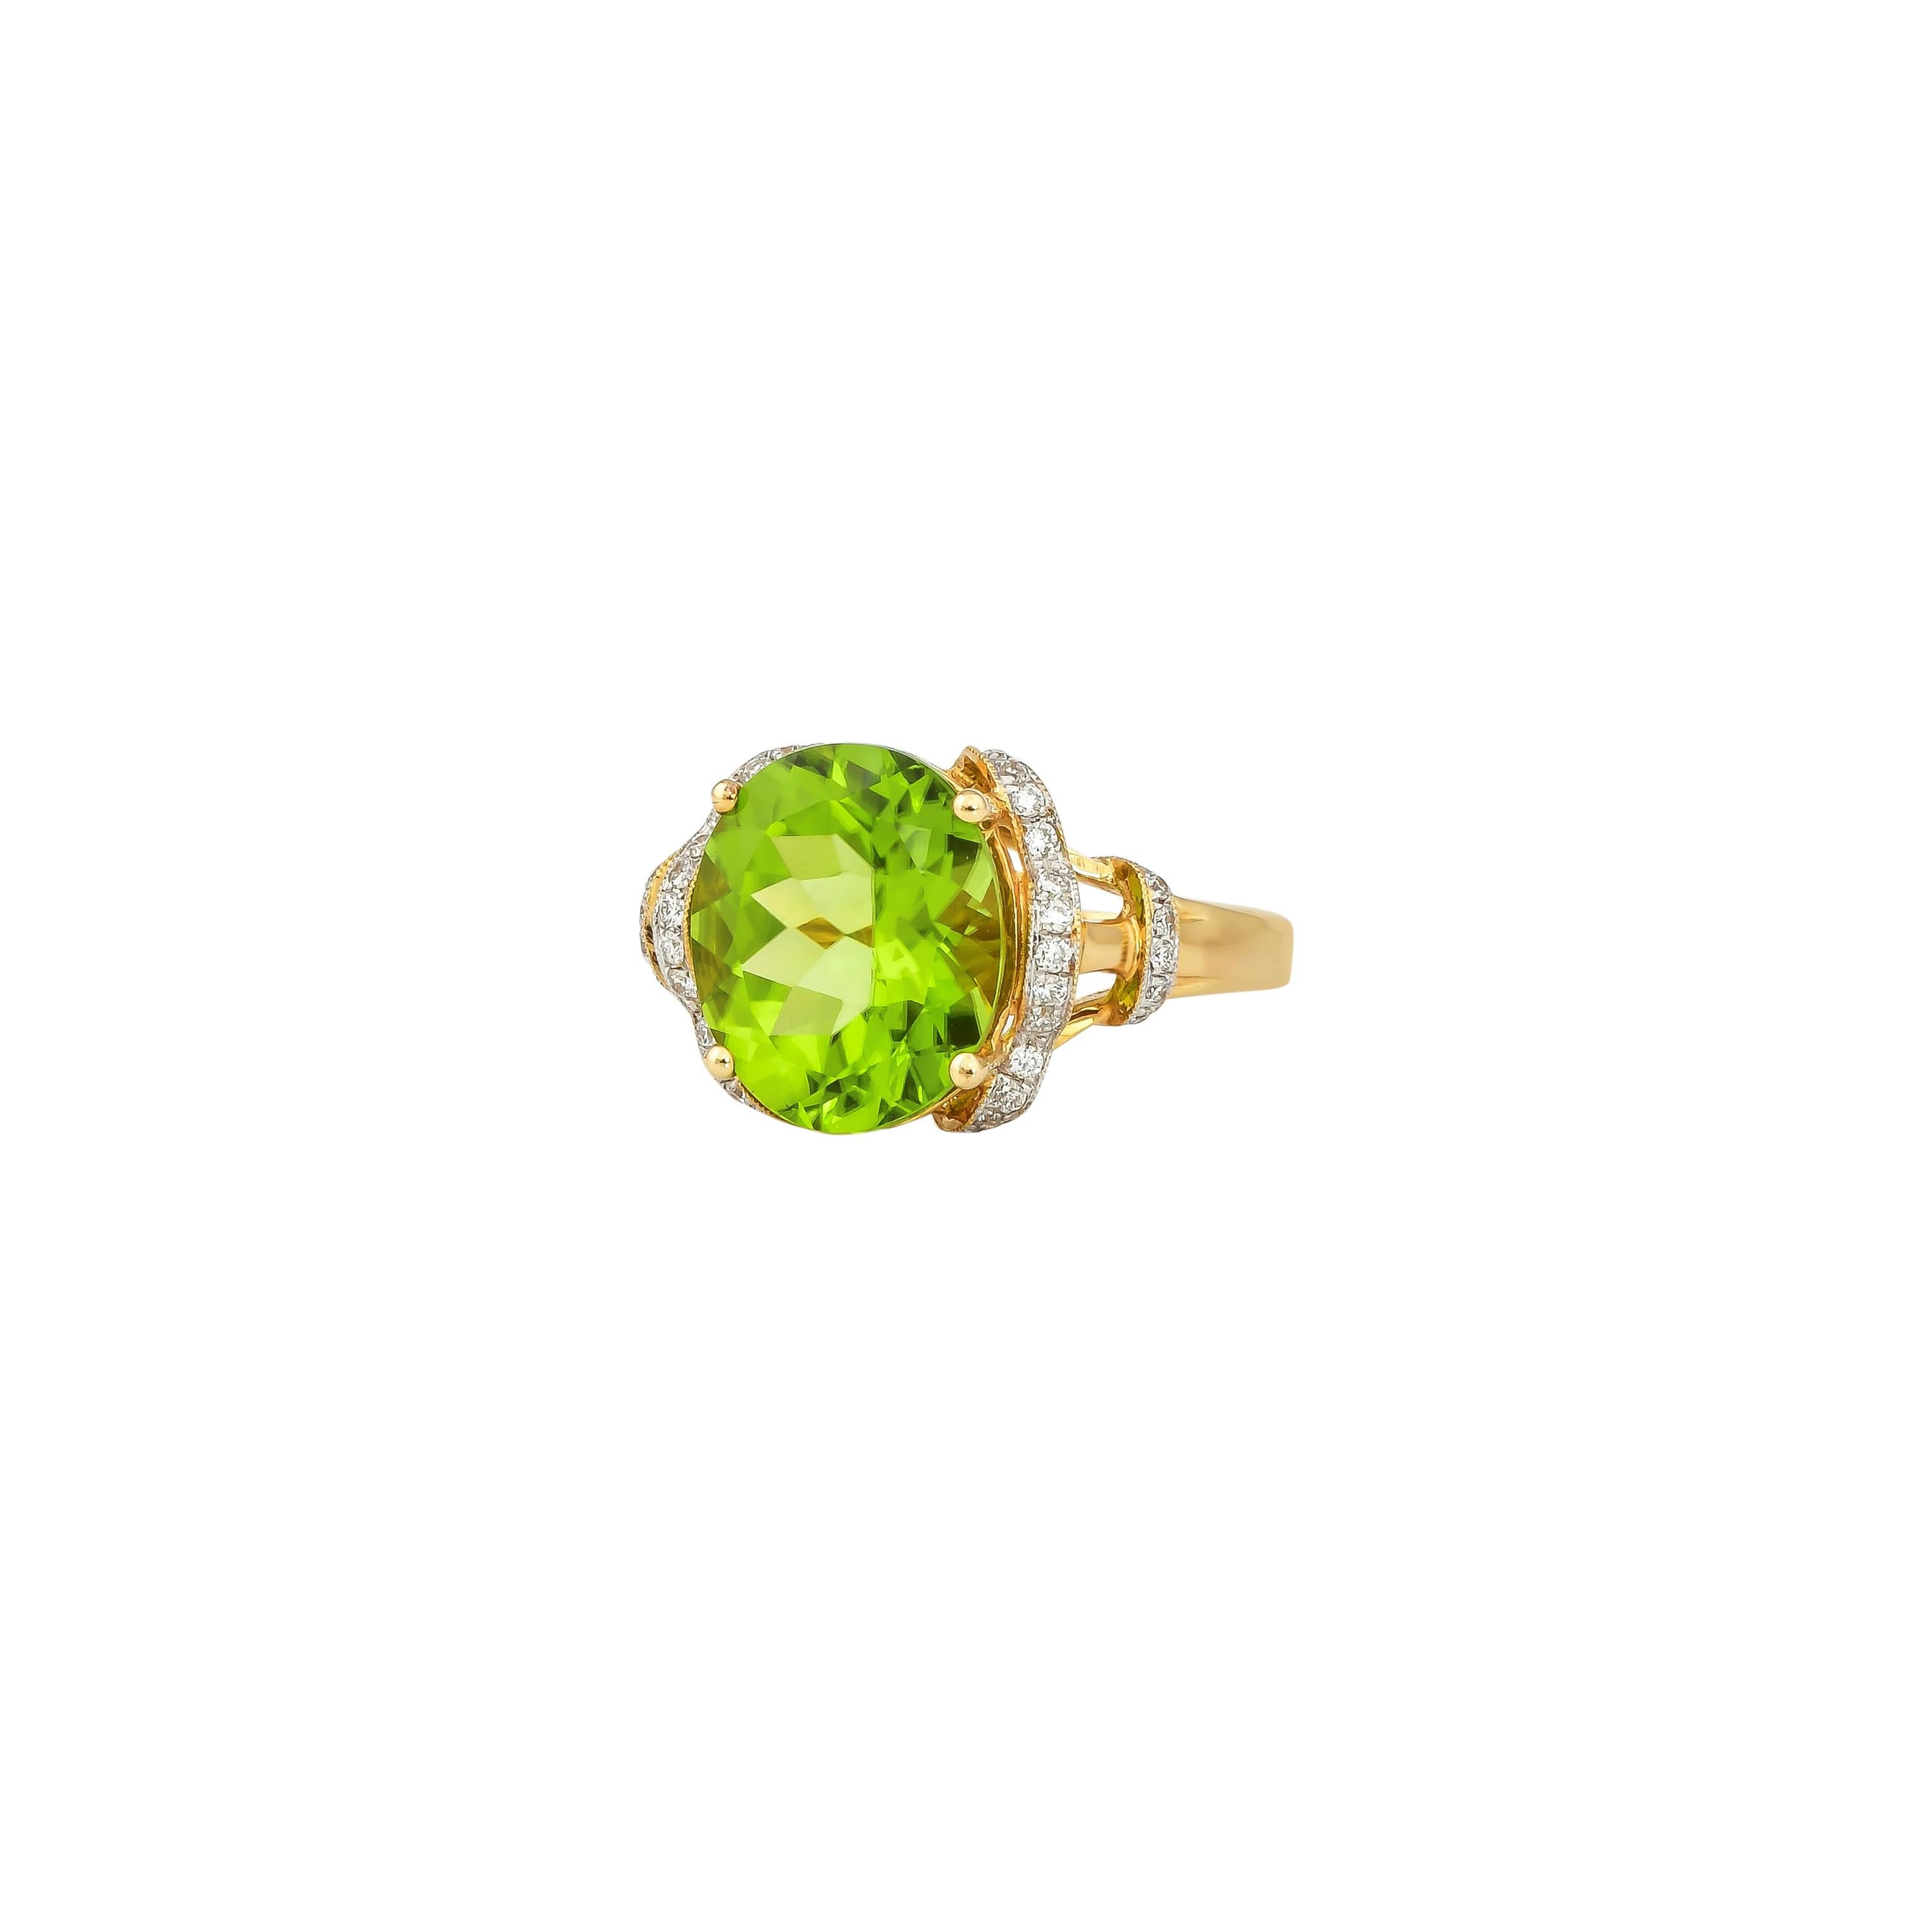 Contemporary 4.63 Carat Peridot and Diamond Ring in 18 Karat Yellow Gold For Sale